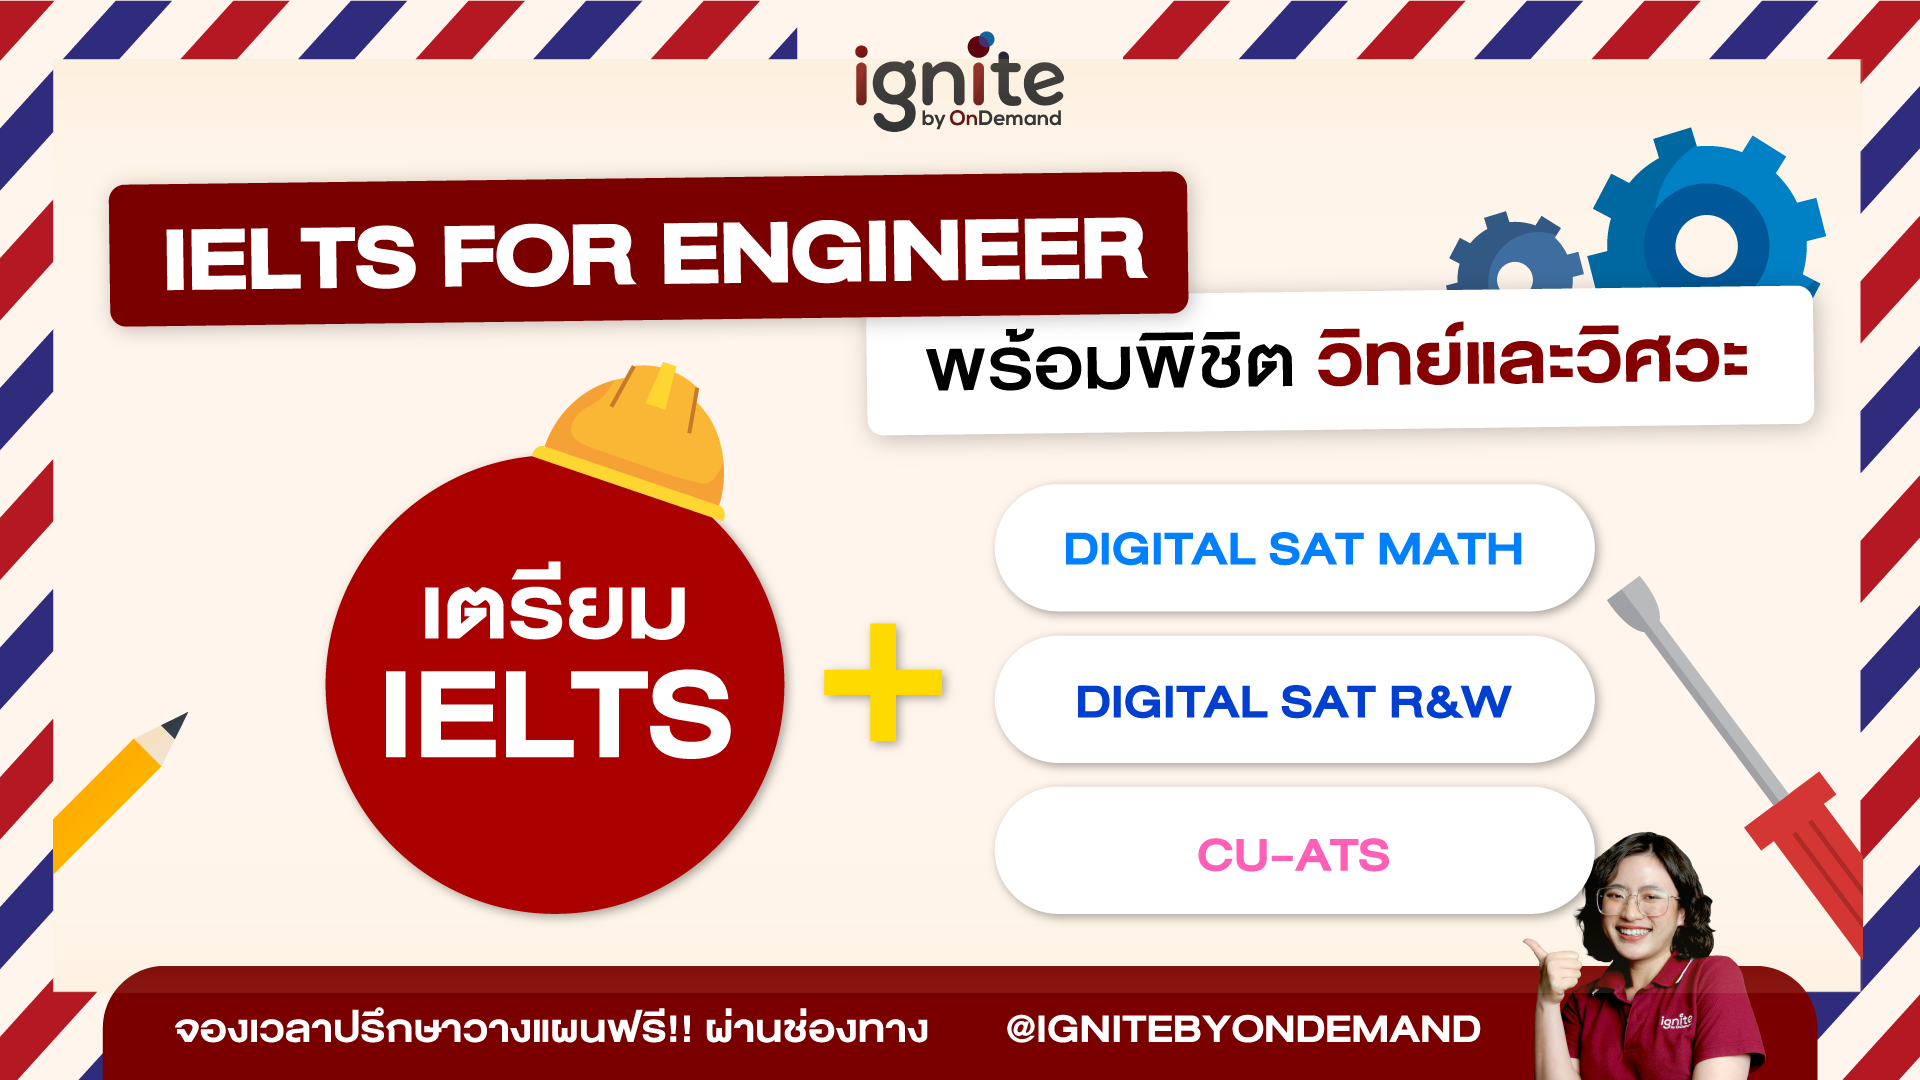 ielts for engineer - ignite by ondemand